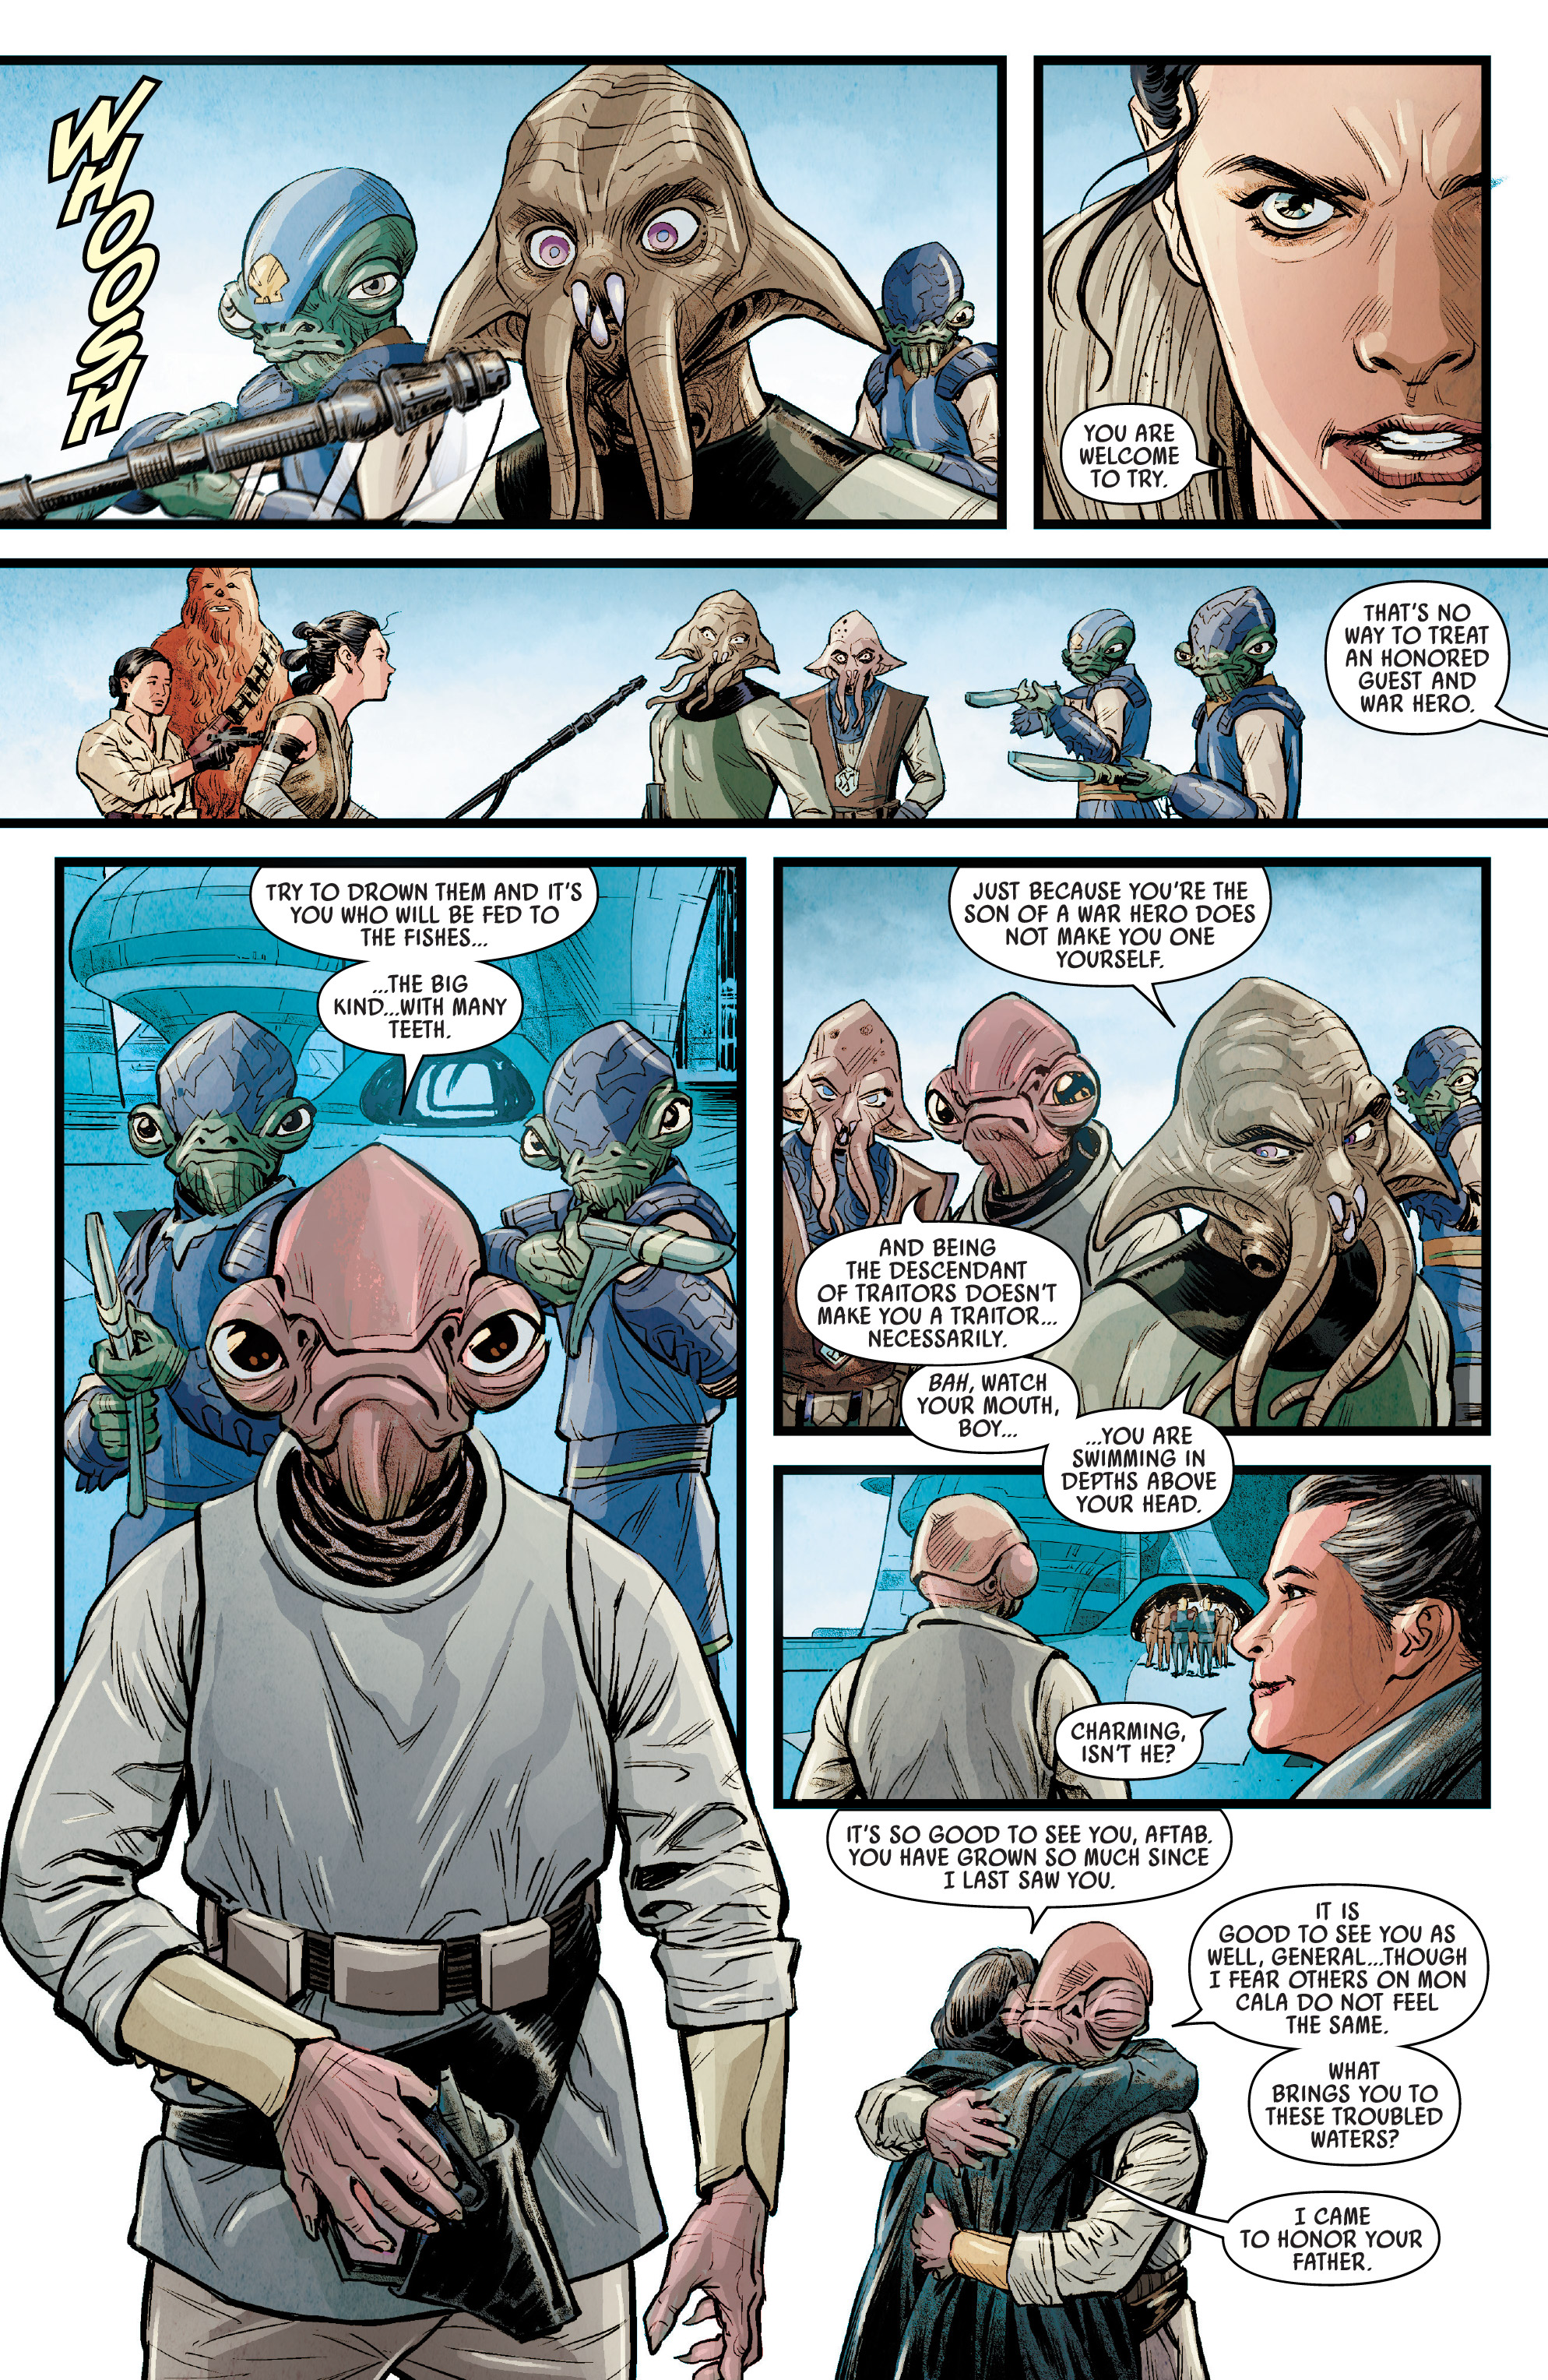 Journey To Star Wars: The Rise Of Skywalker - Allegiance (2019): Chapter 2 - Page 4